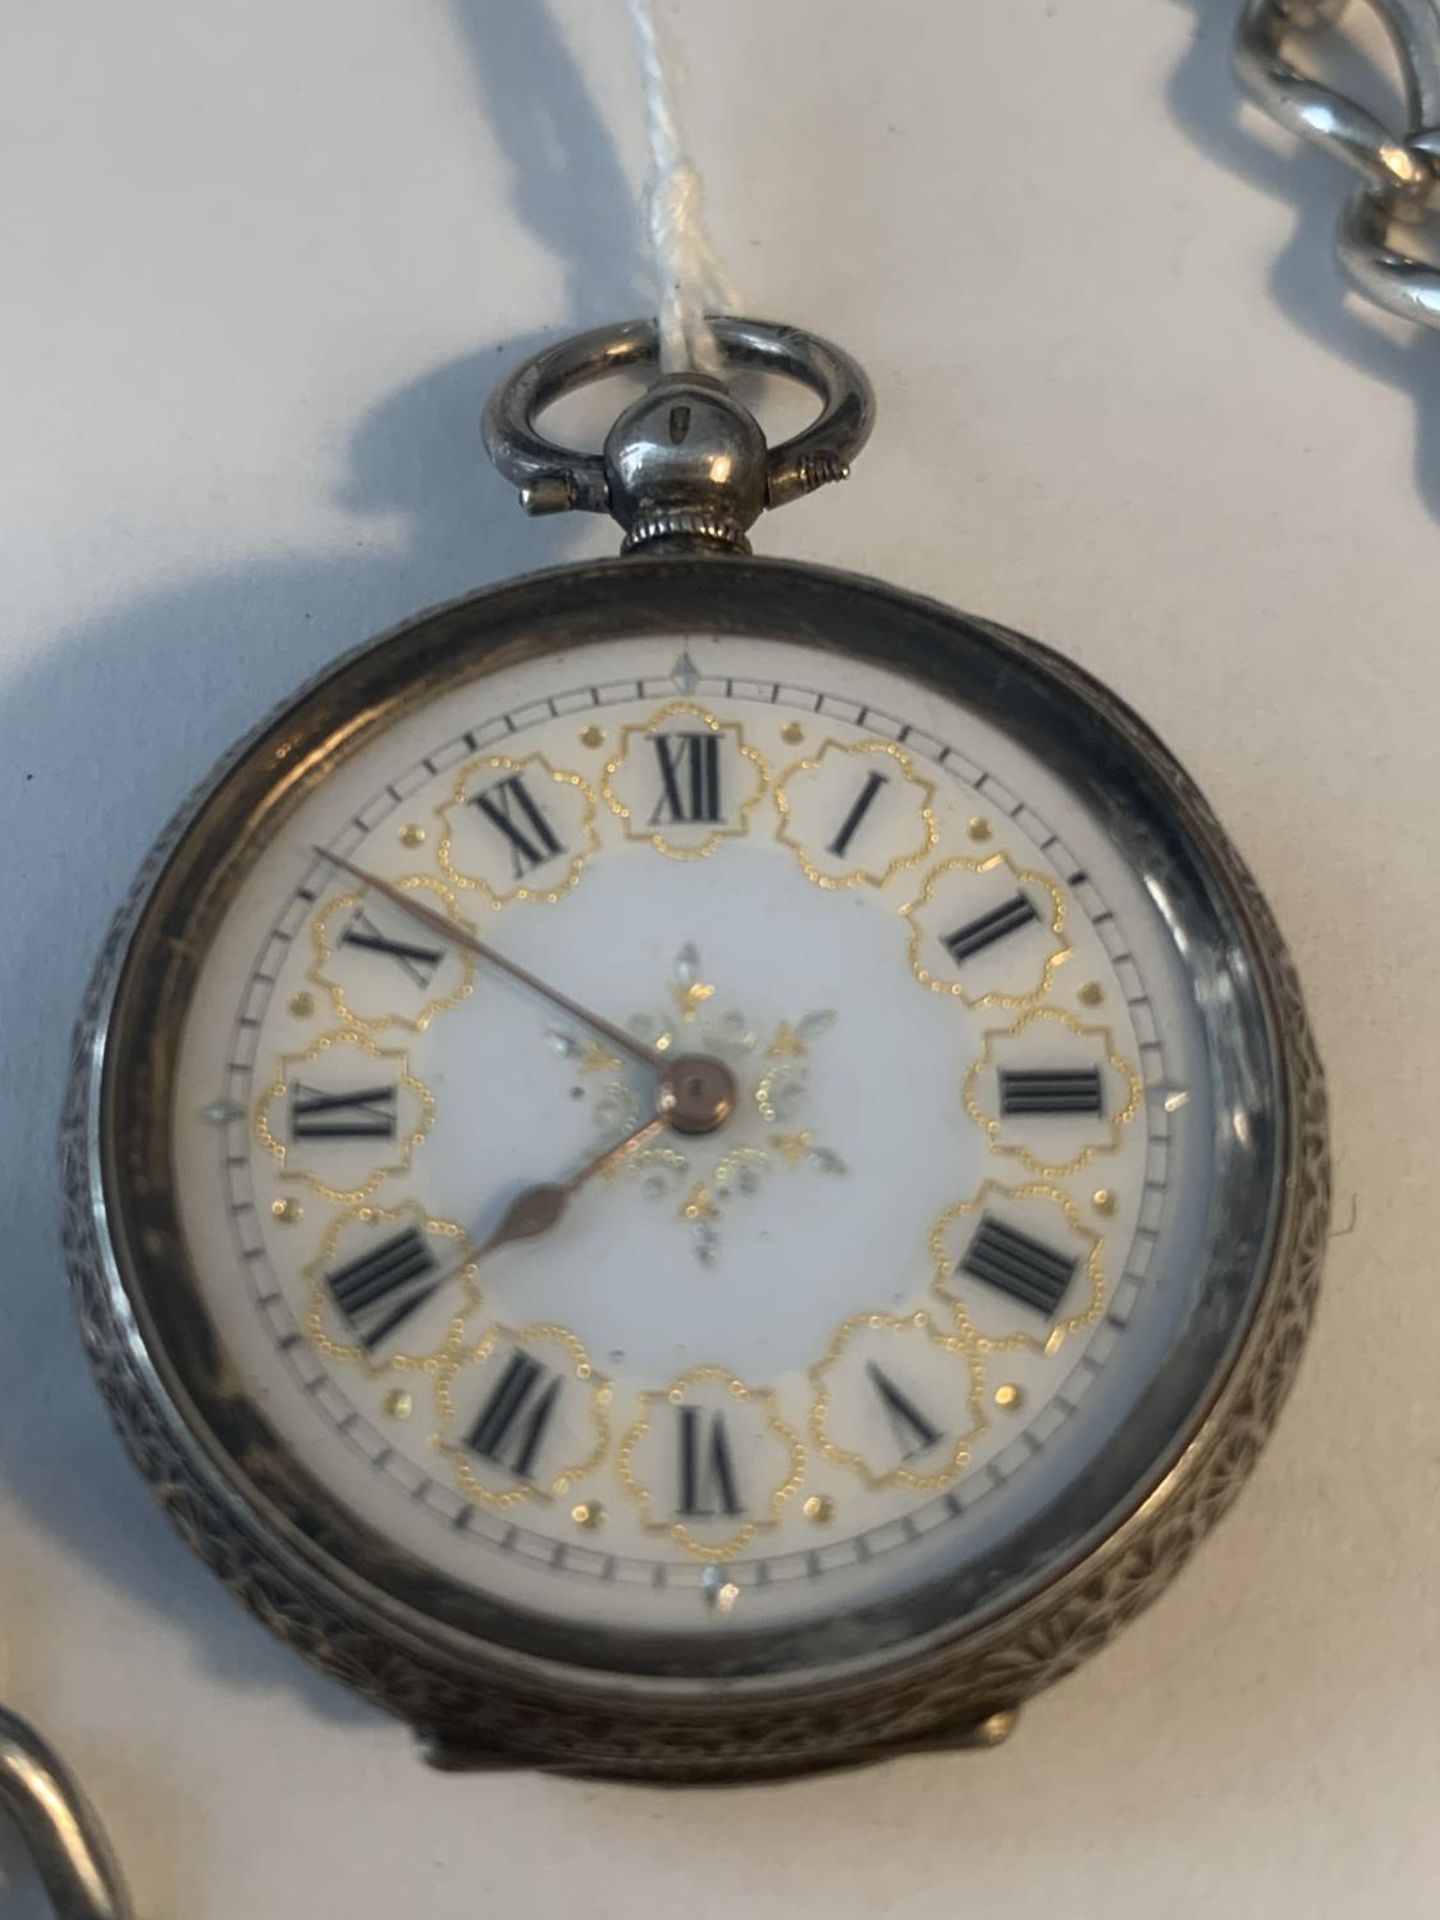 A MARKED 935 SILVER LADIES POCKET WATCH WITH DECORATIVE FACE AND CASE WITH A MARKED T BAR CHAIN - Image 2 of 6